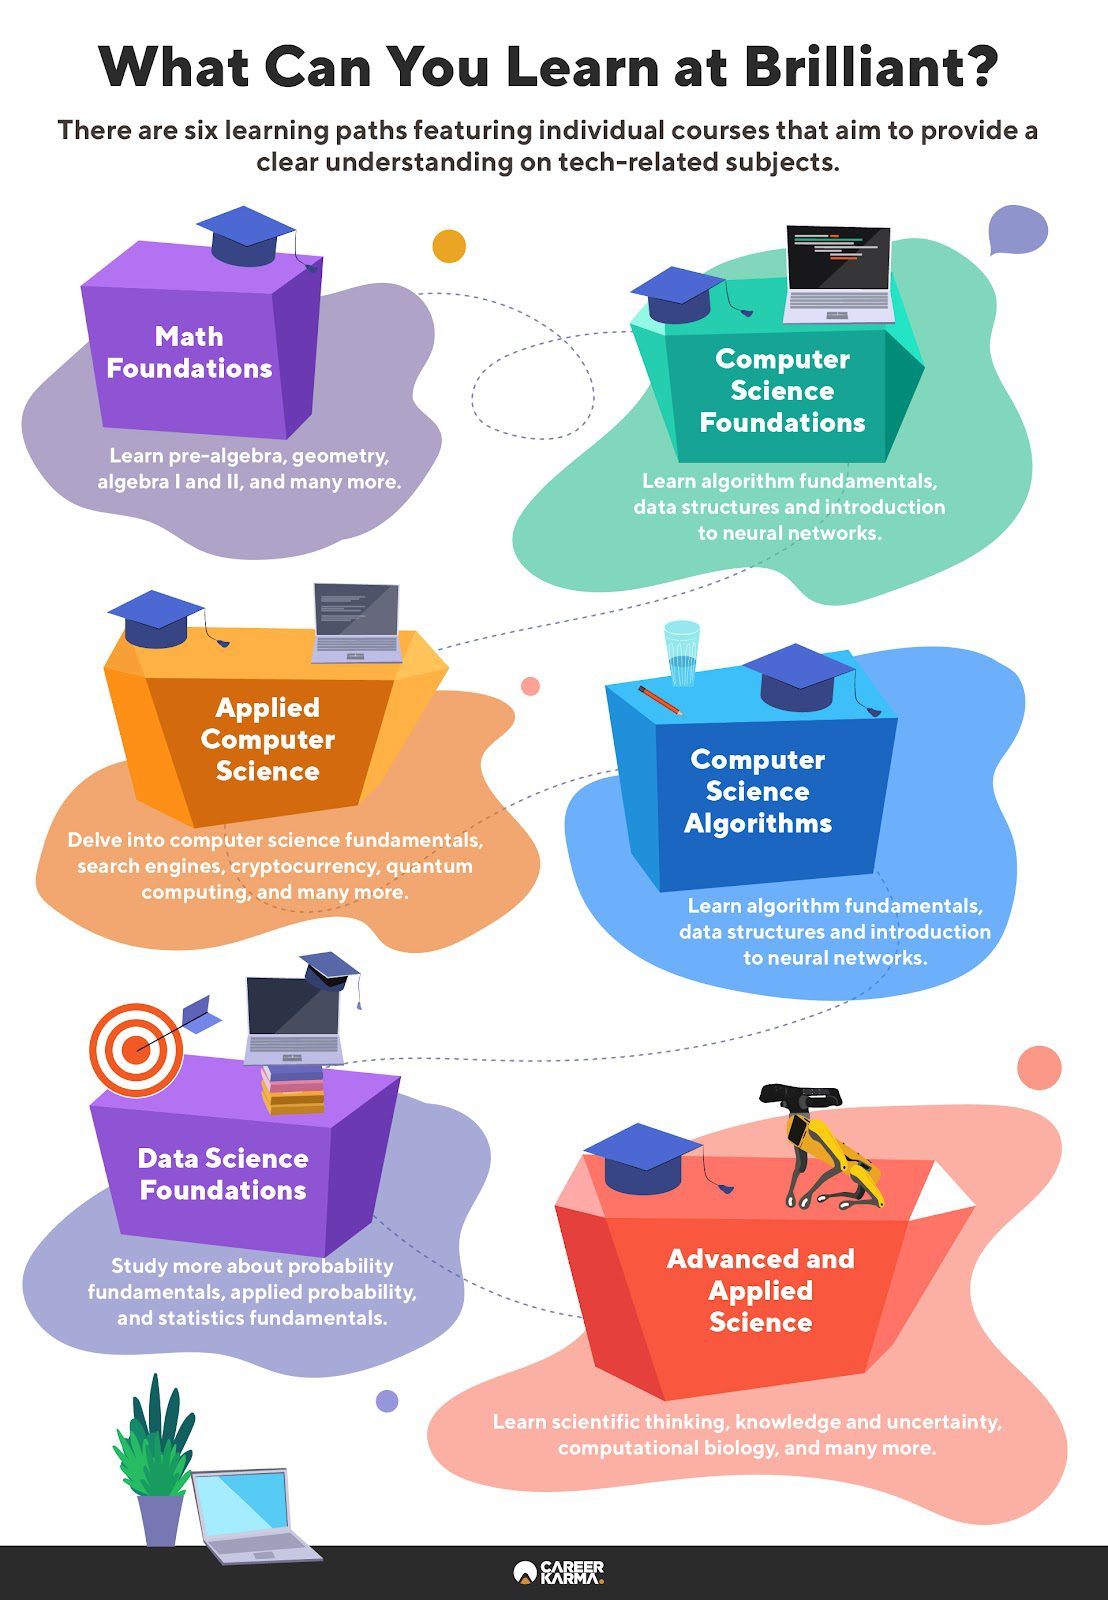 An infographic covering Brilliant’s learning paths